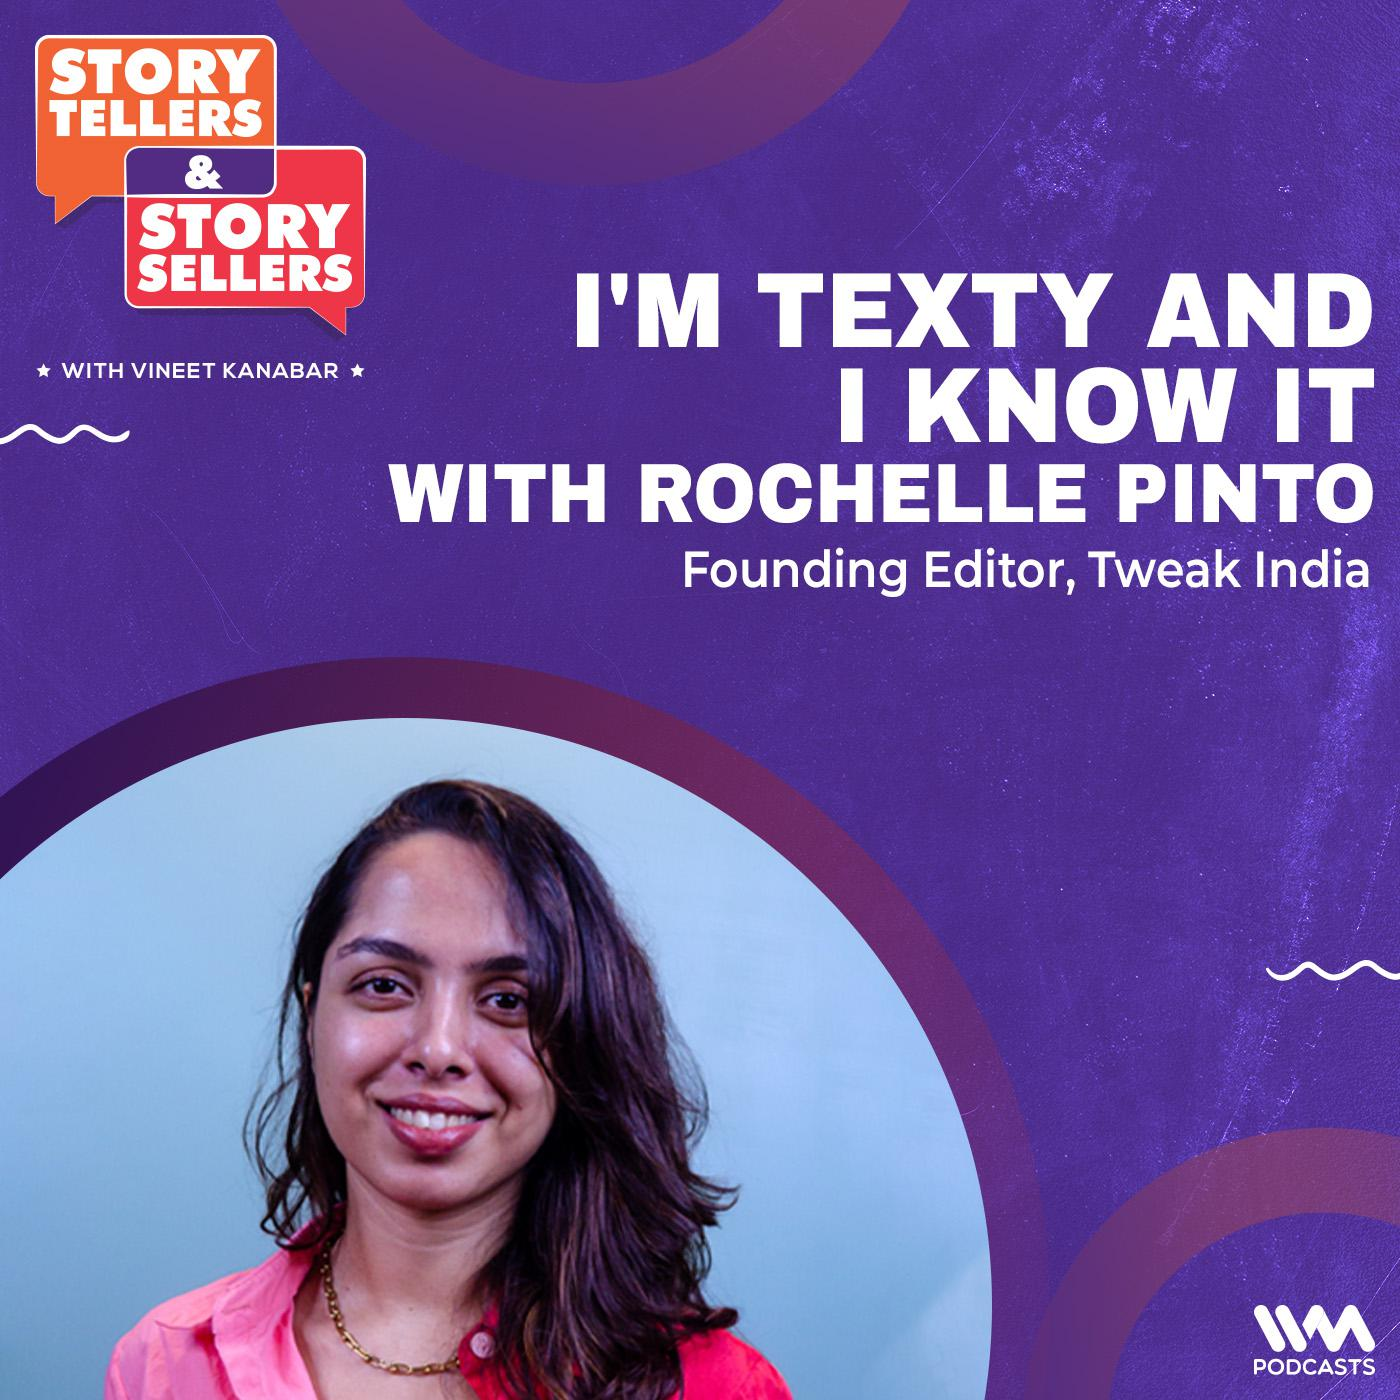 I'm Texty and I know it, with Rochelle Pinto